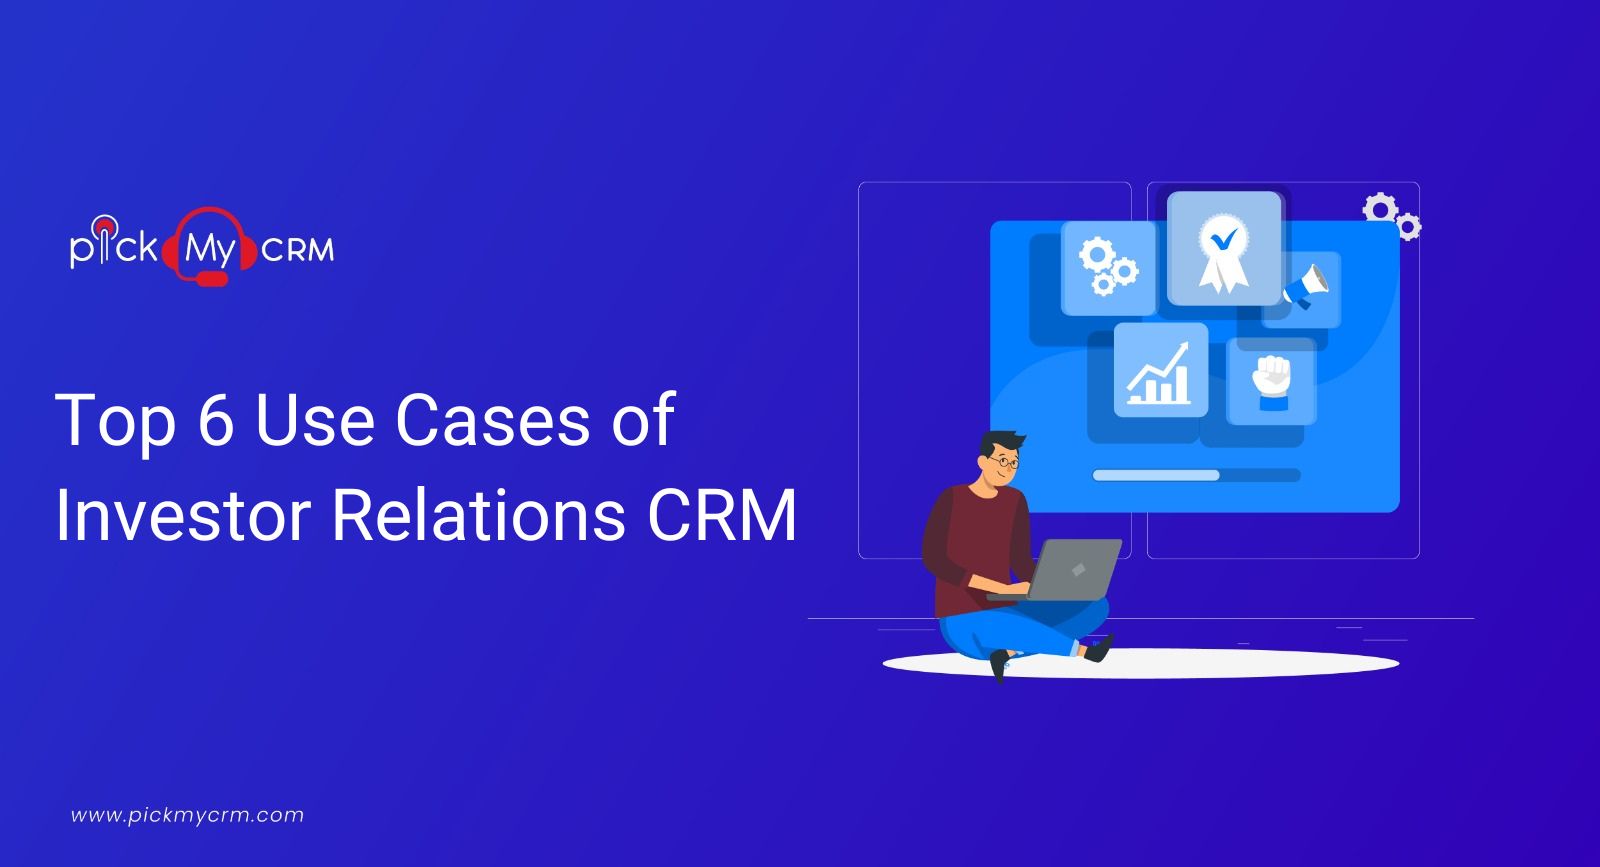 Top 6 Use Cases of Investor Relations CRM